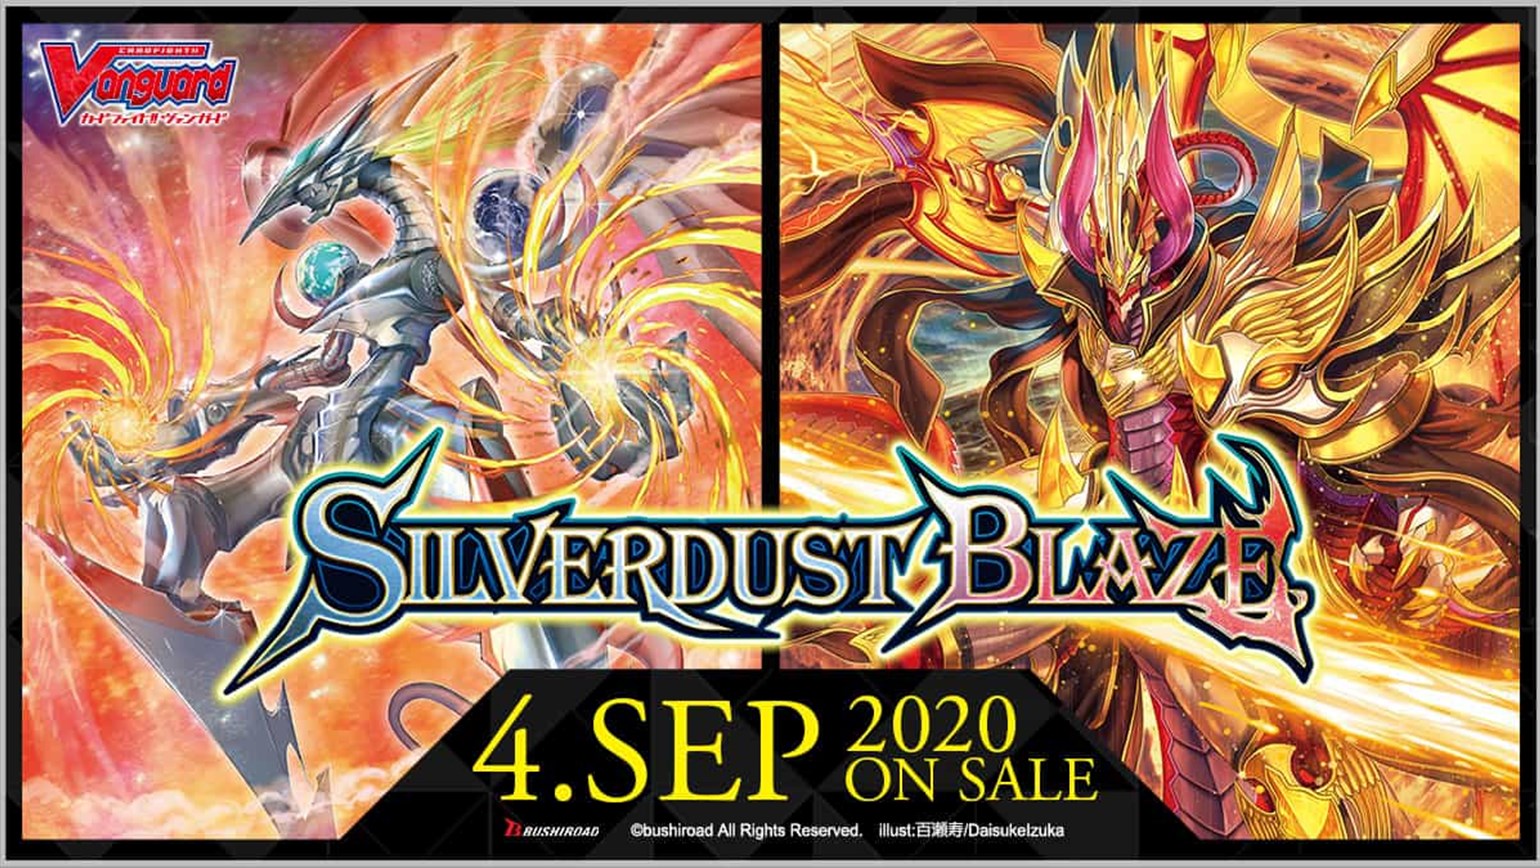 English Edition Cardfight!! Vanguard Booster Pack Vol. 08: Silverdust Blaze Coming September 4th